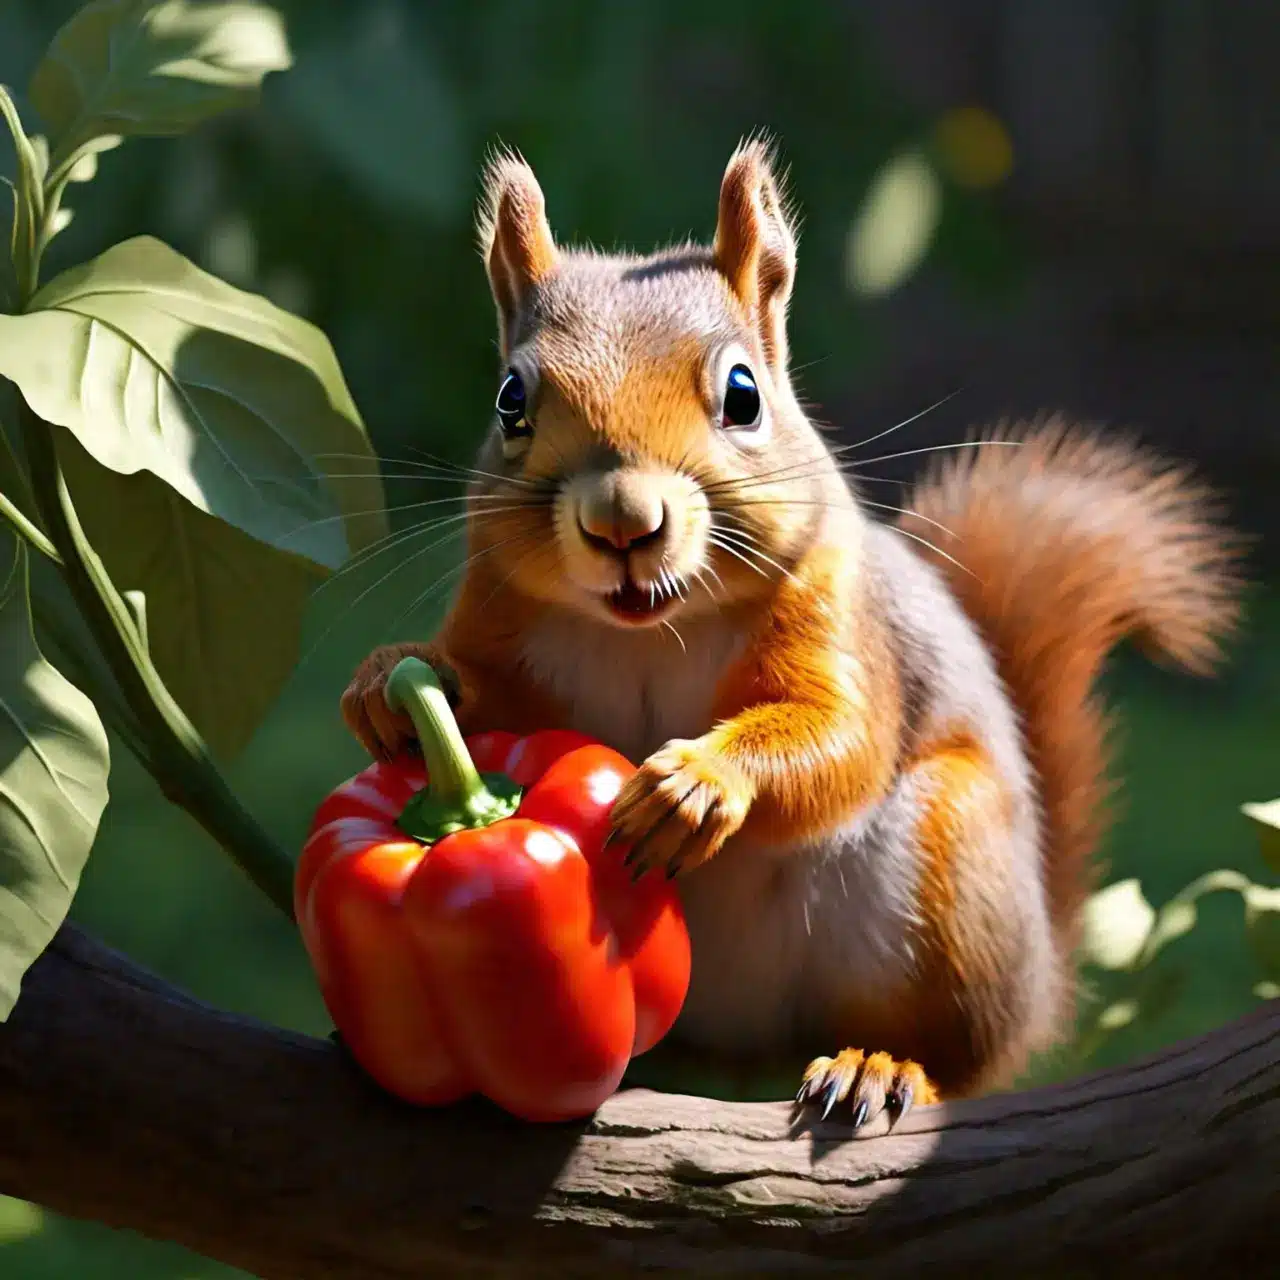 squirrel is holding a bright red bell pepper